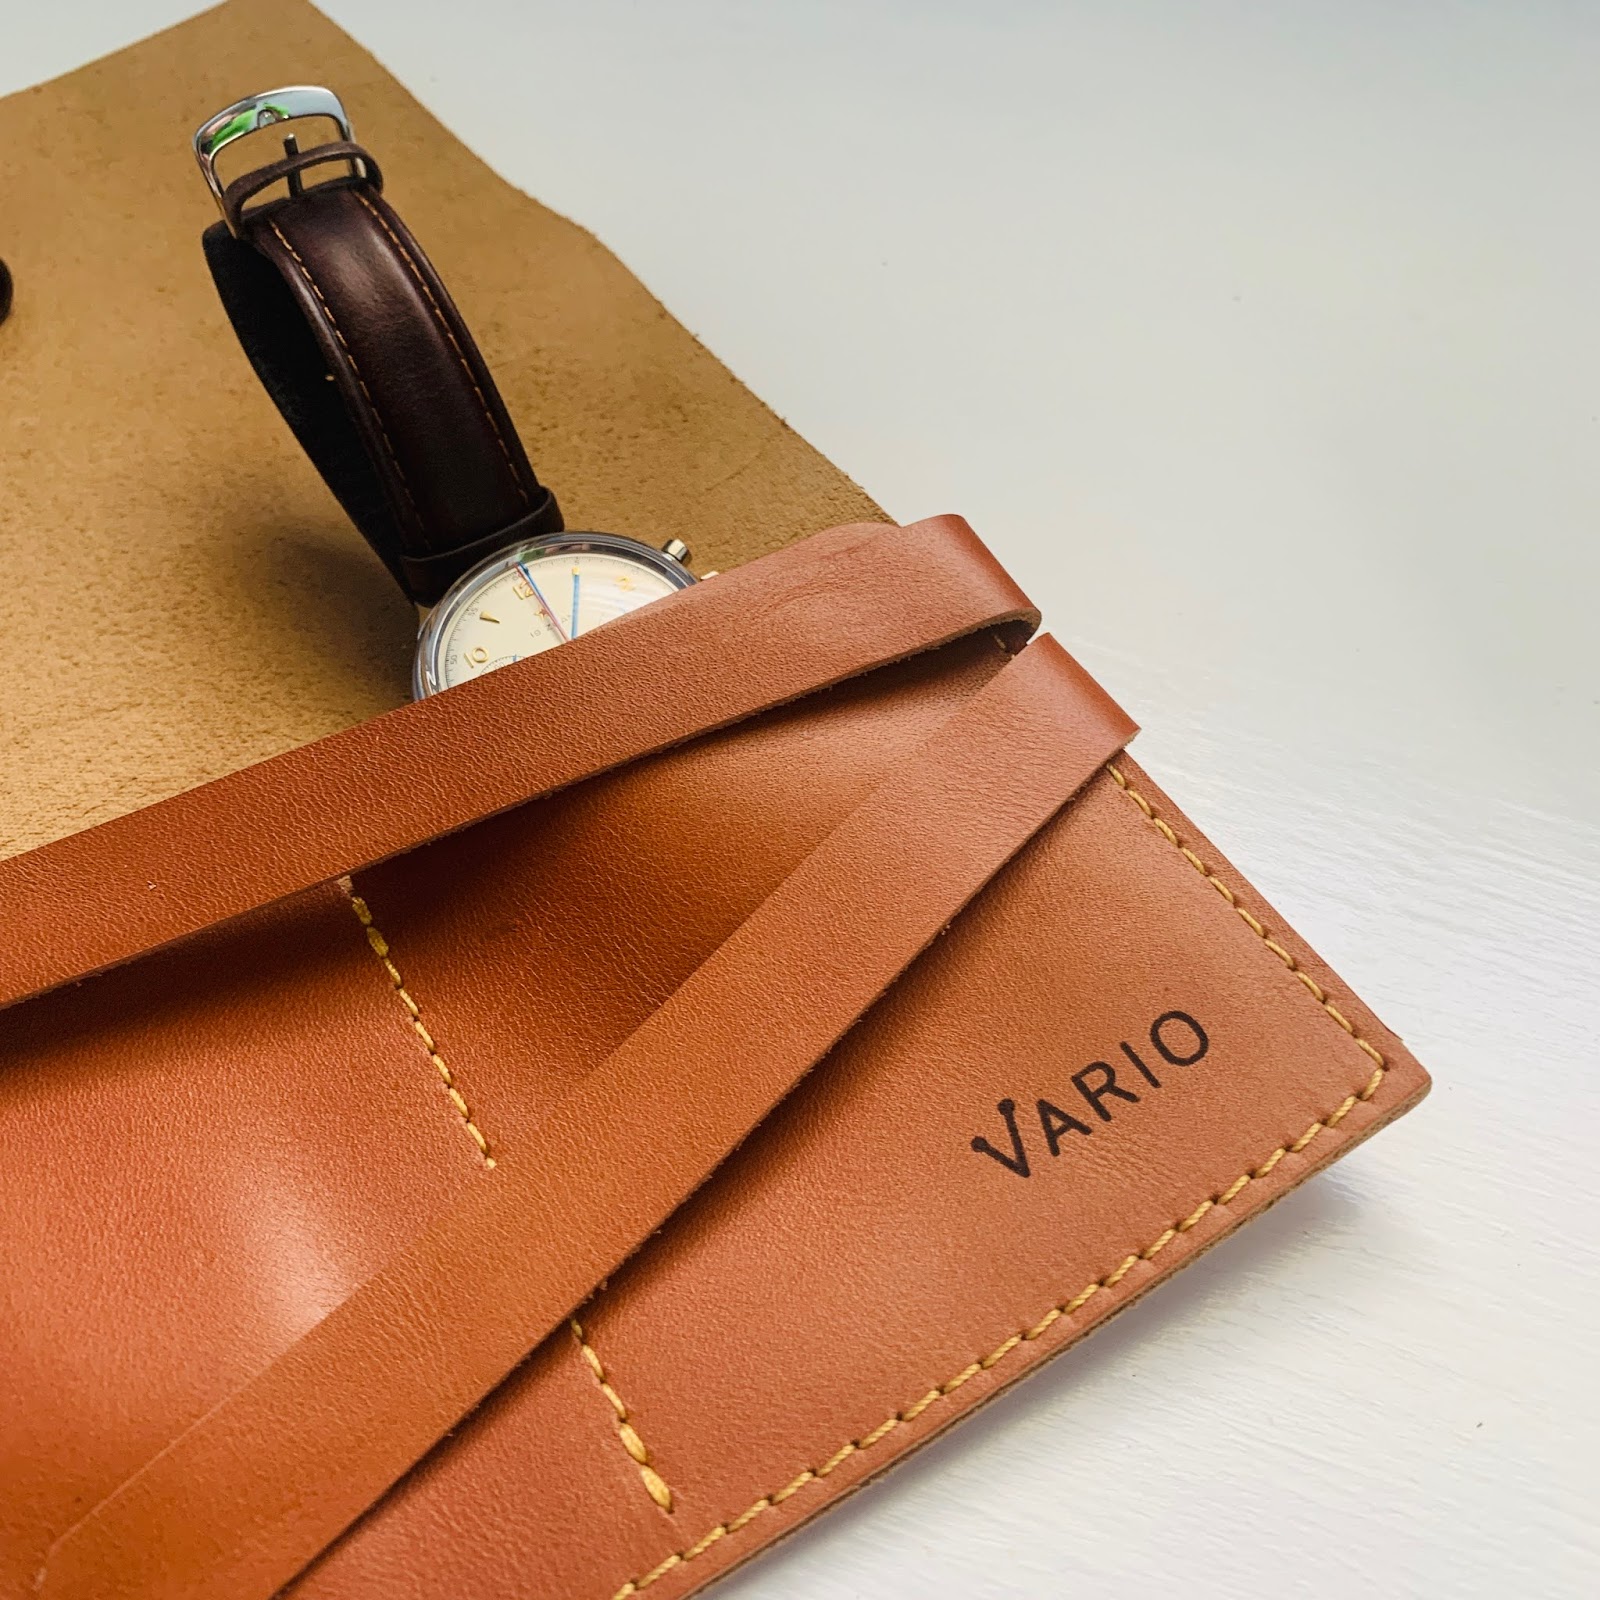 Giveaway: Vario Watch Accessory Package